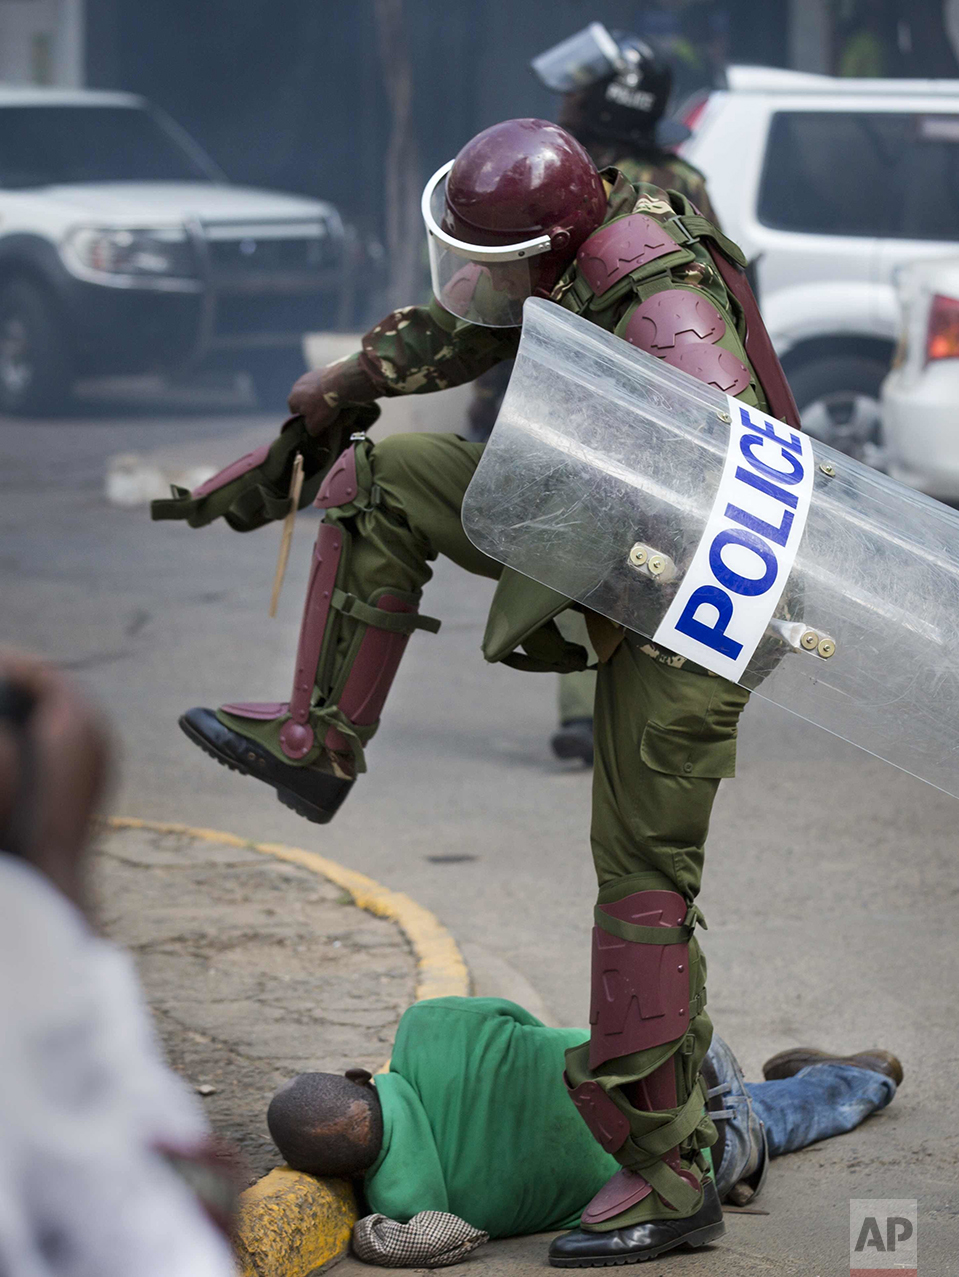  In this Monday, May 16, 2016 photo, a Kenyan riot policeman repeatedly kicks a protester as he lies in the street after tripping over while trying to flee from them, during a protest in downtown Nairobi, Kenya. Kenyan police have tear-gassed and bea